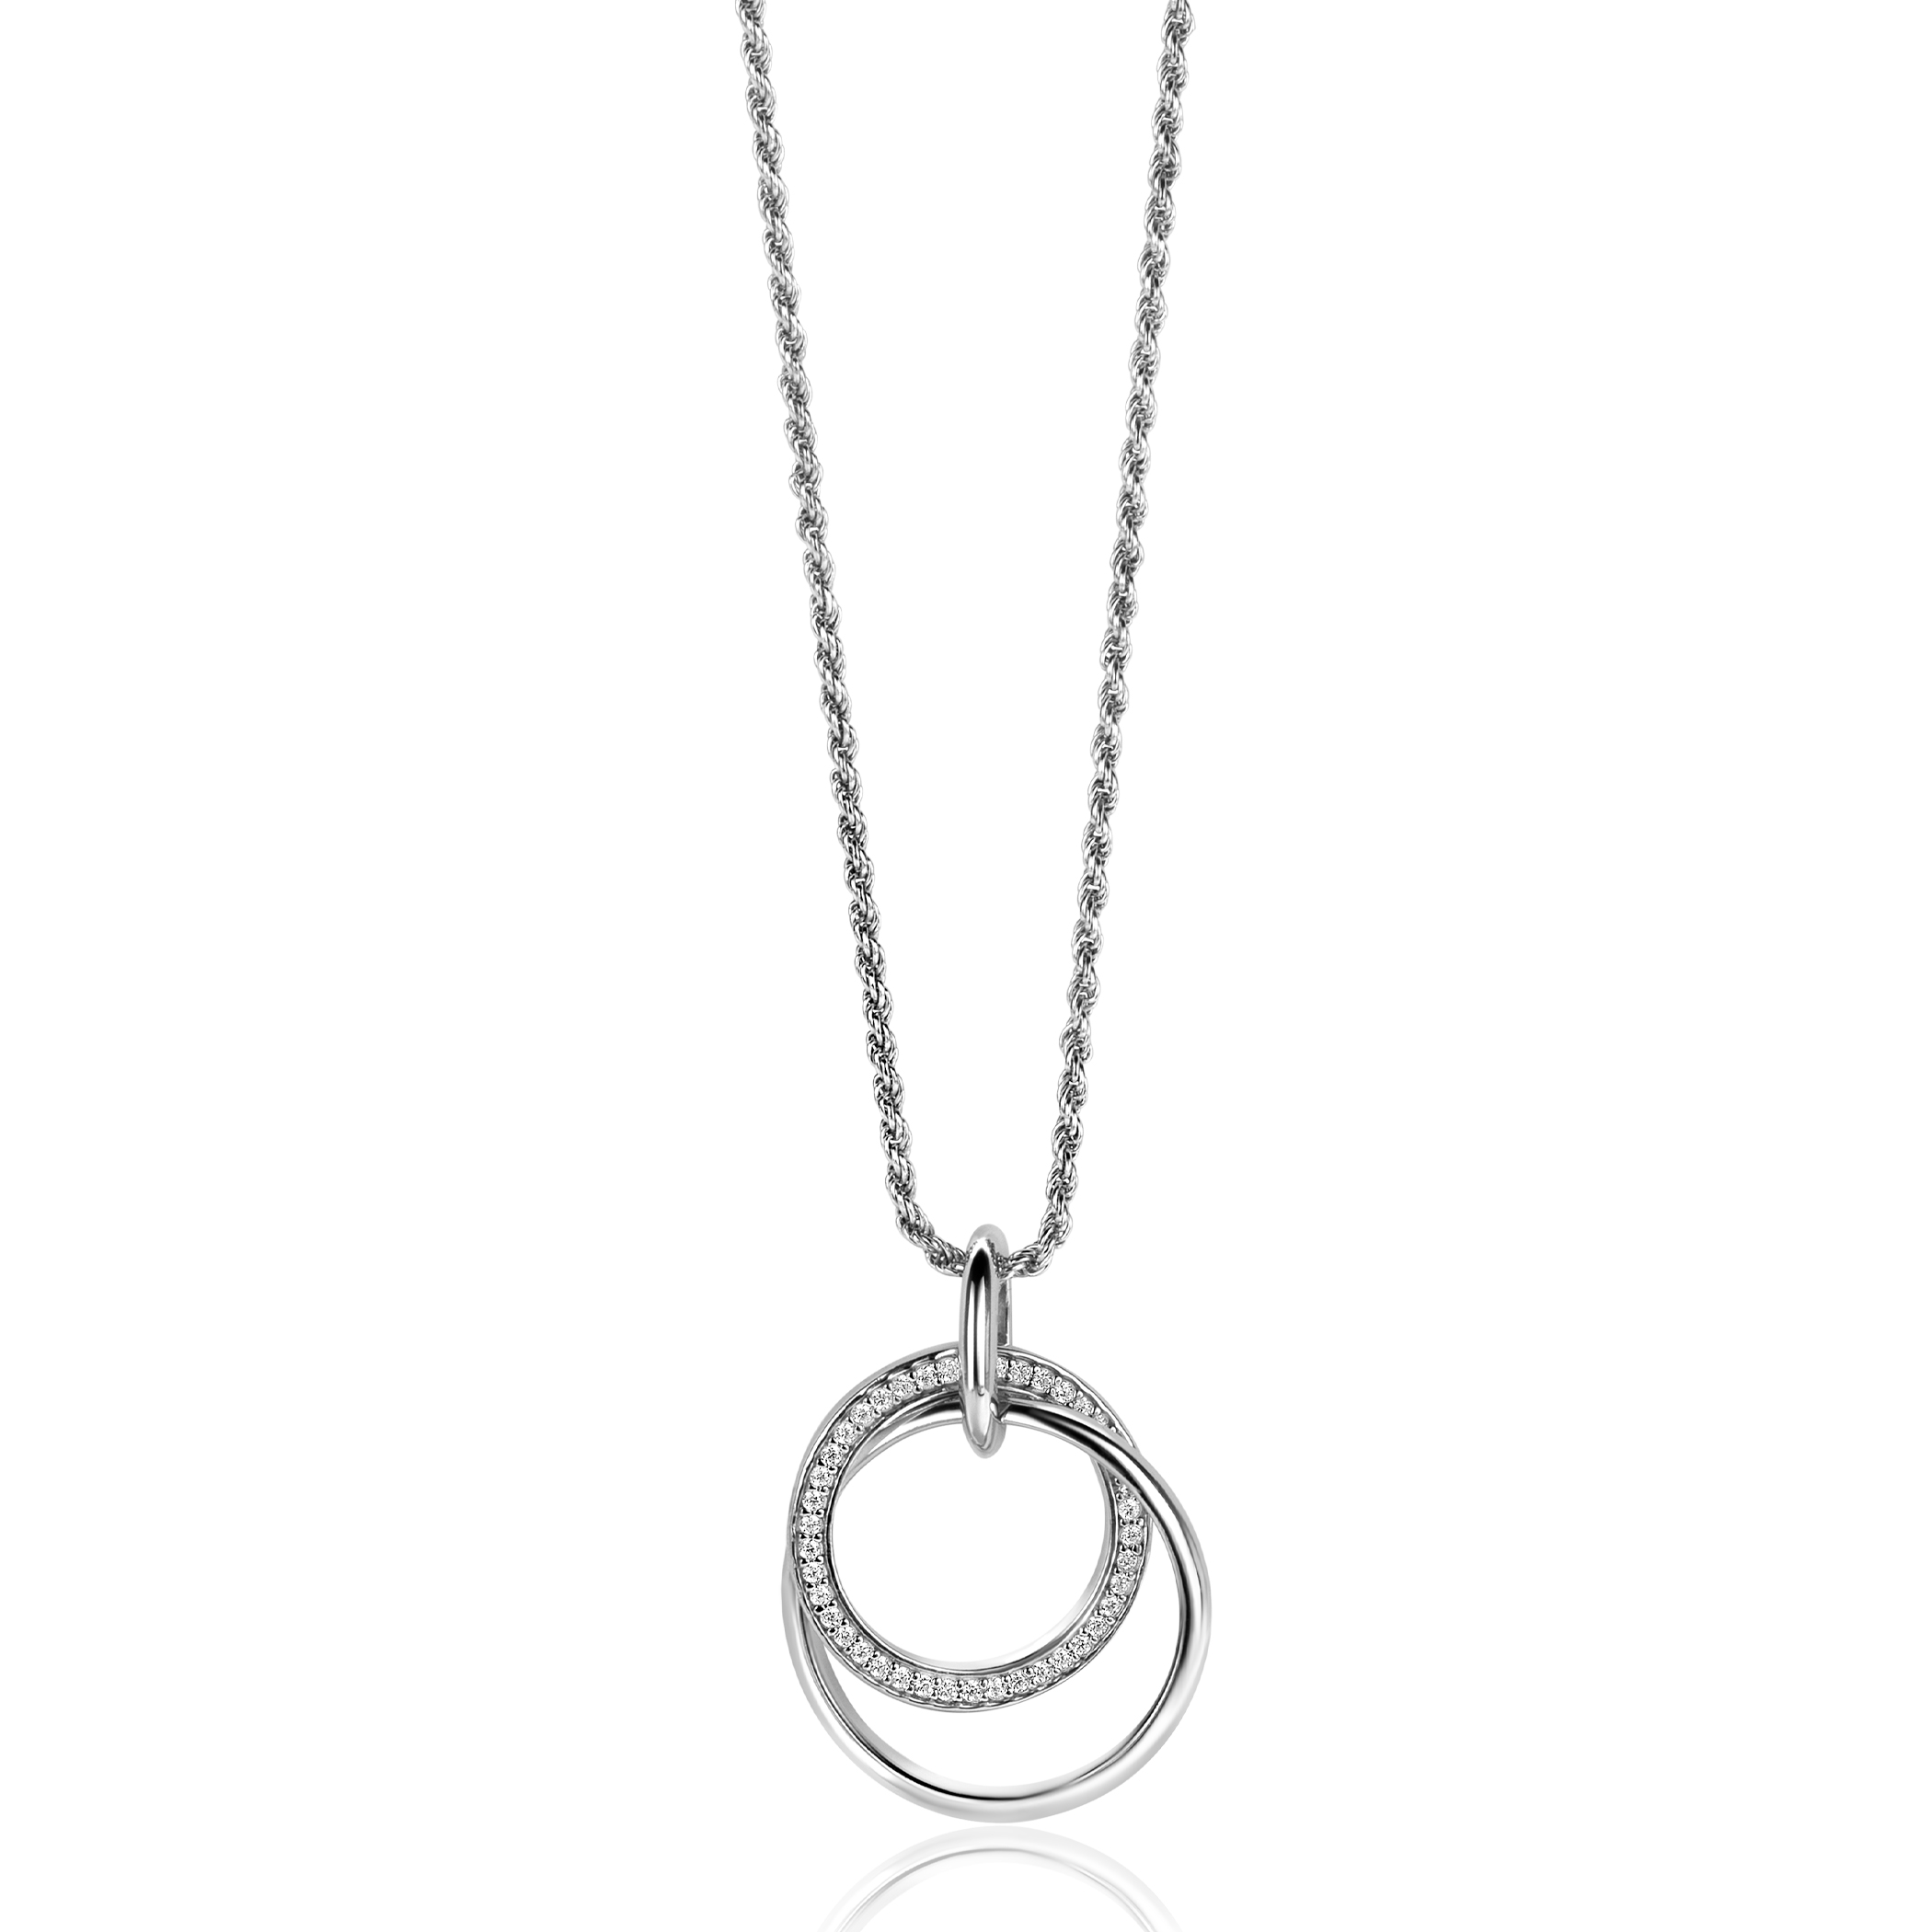 26mm ZINZI Sterling Silver Pendant with 2 Intertwined Open Circles White Zirconias ZIH2431 (excl. necklace)